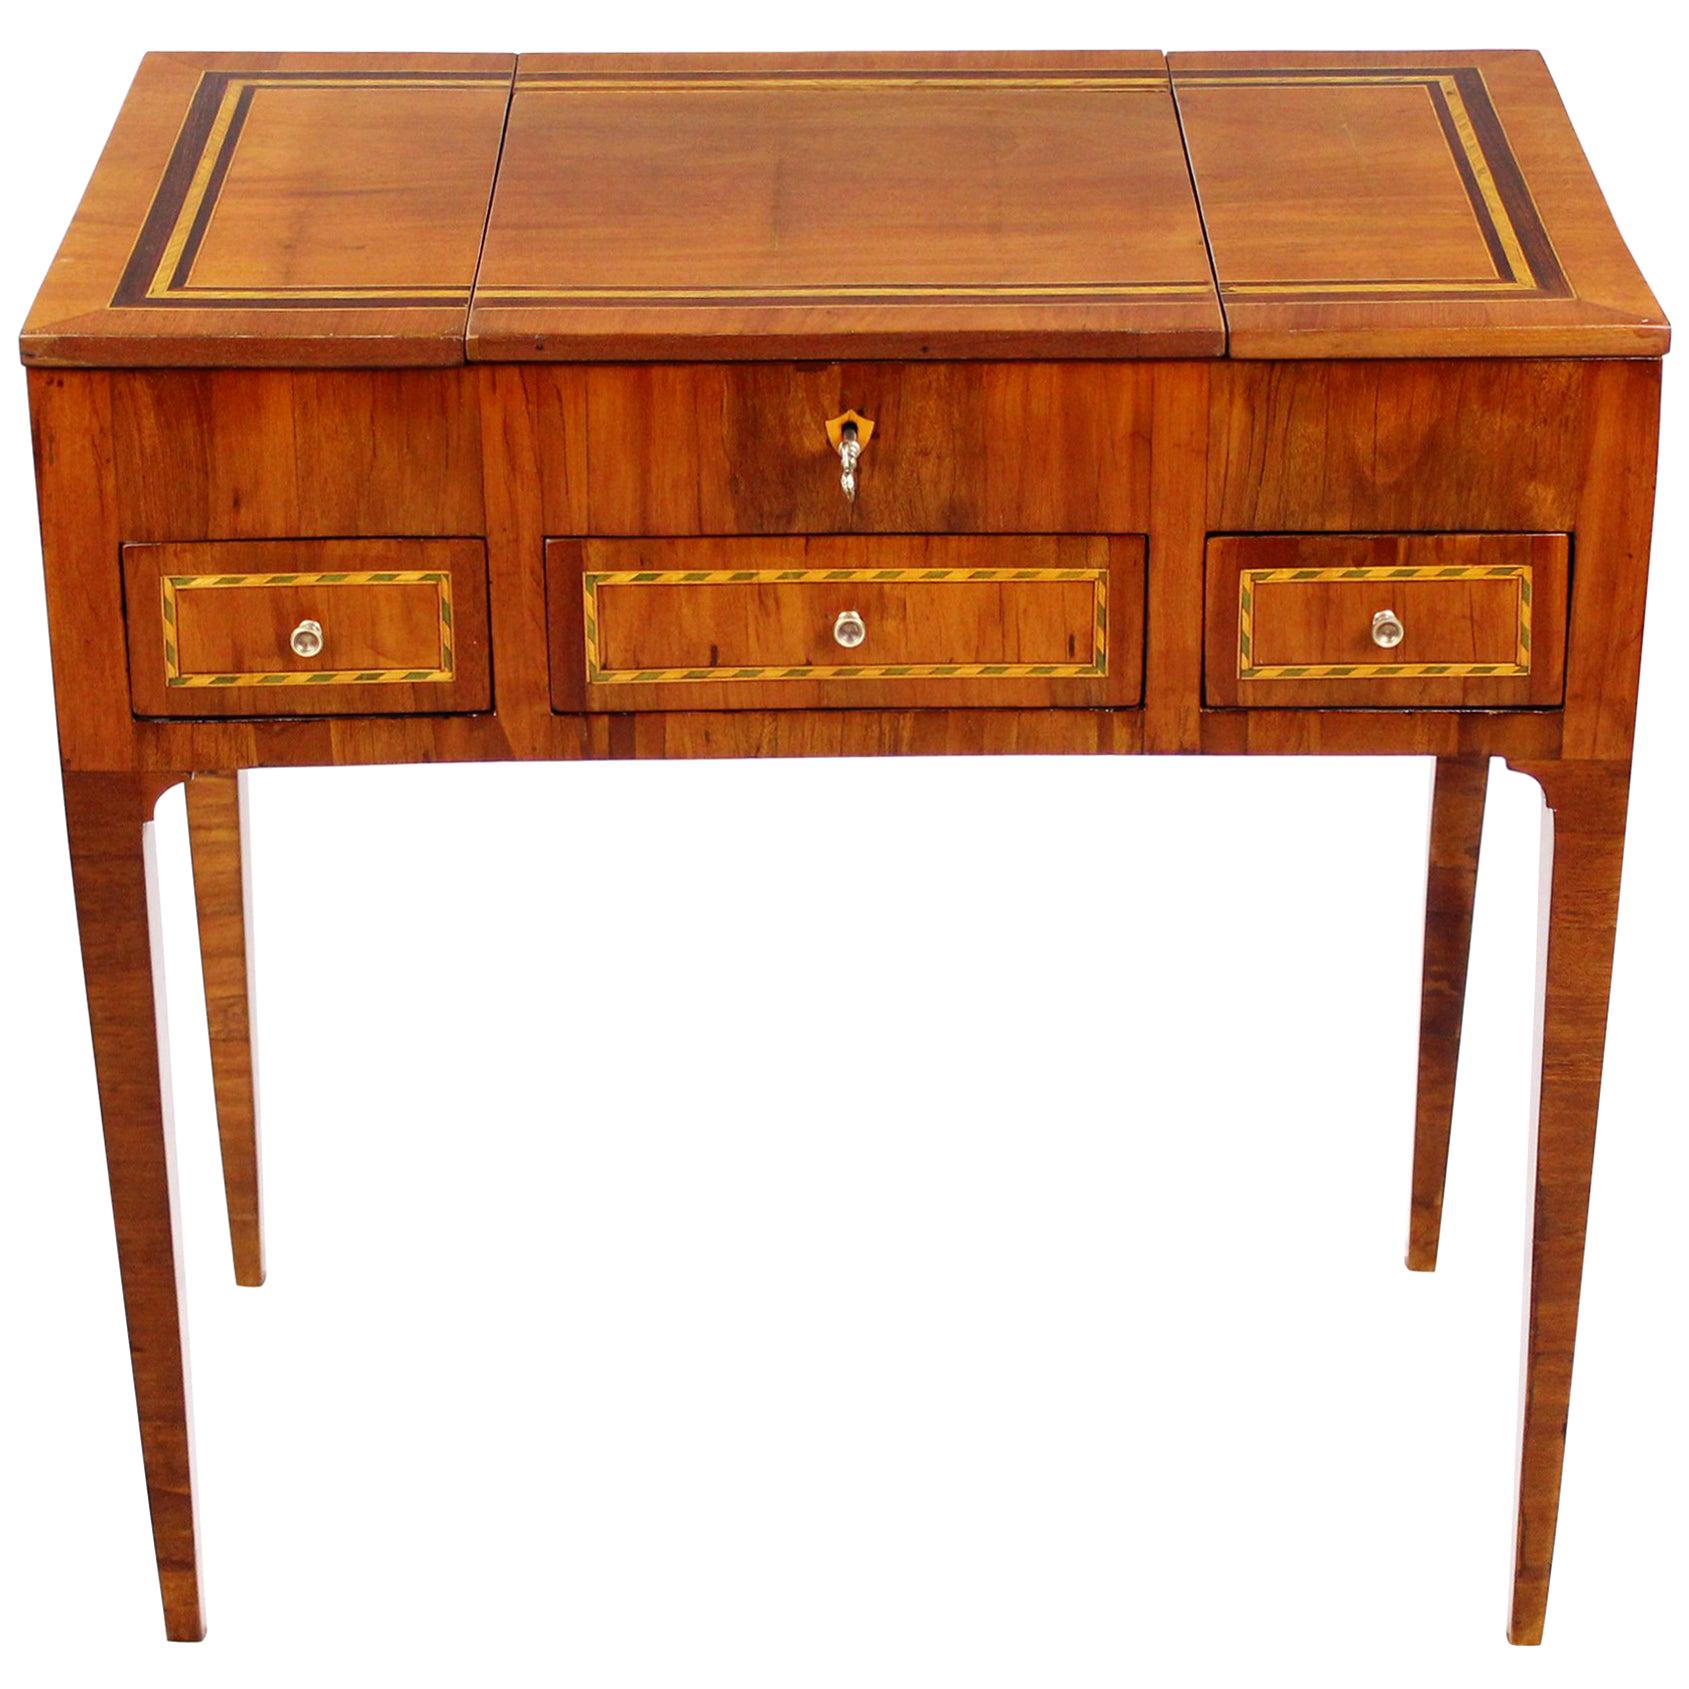 Early 19th Century Dressing Table, Poudreuse, Mahogany Veneered, Marquetry Works